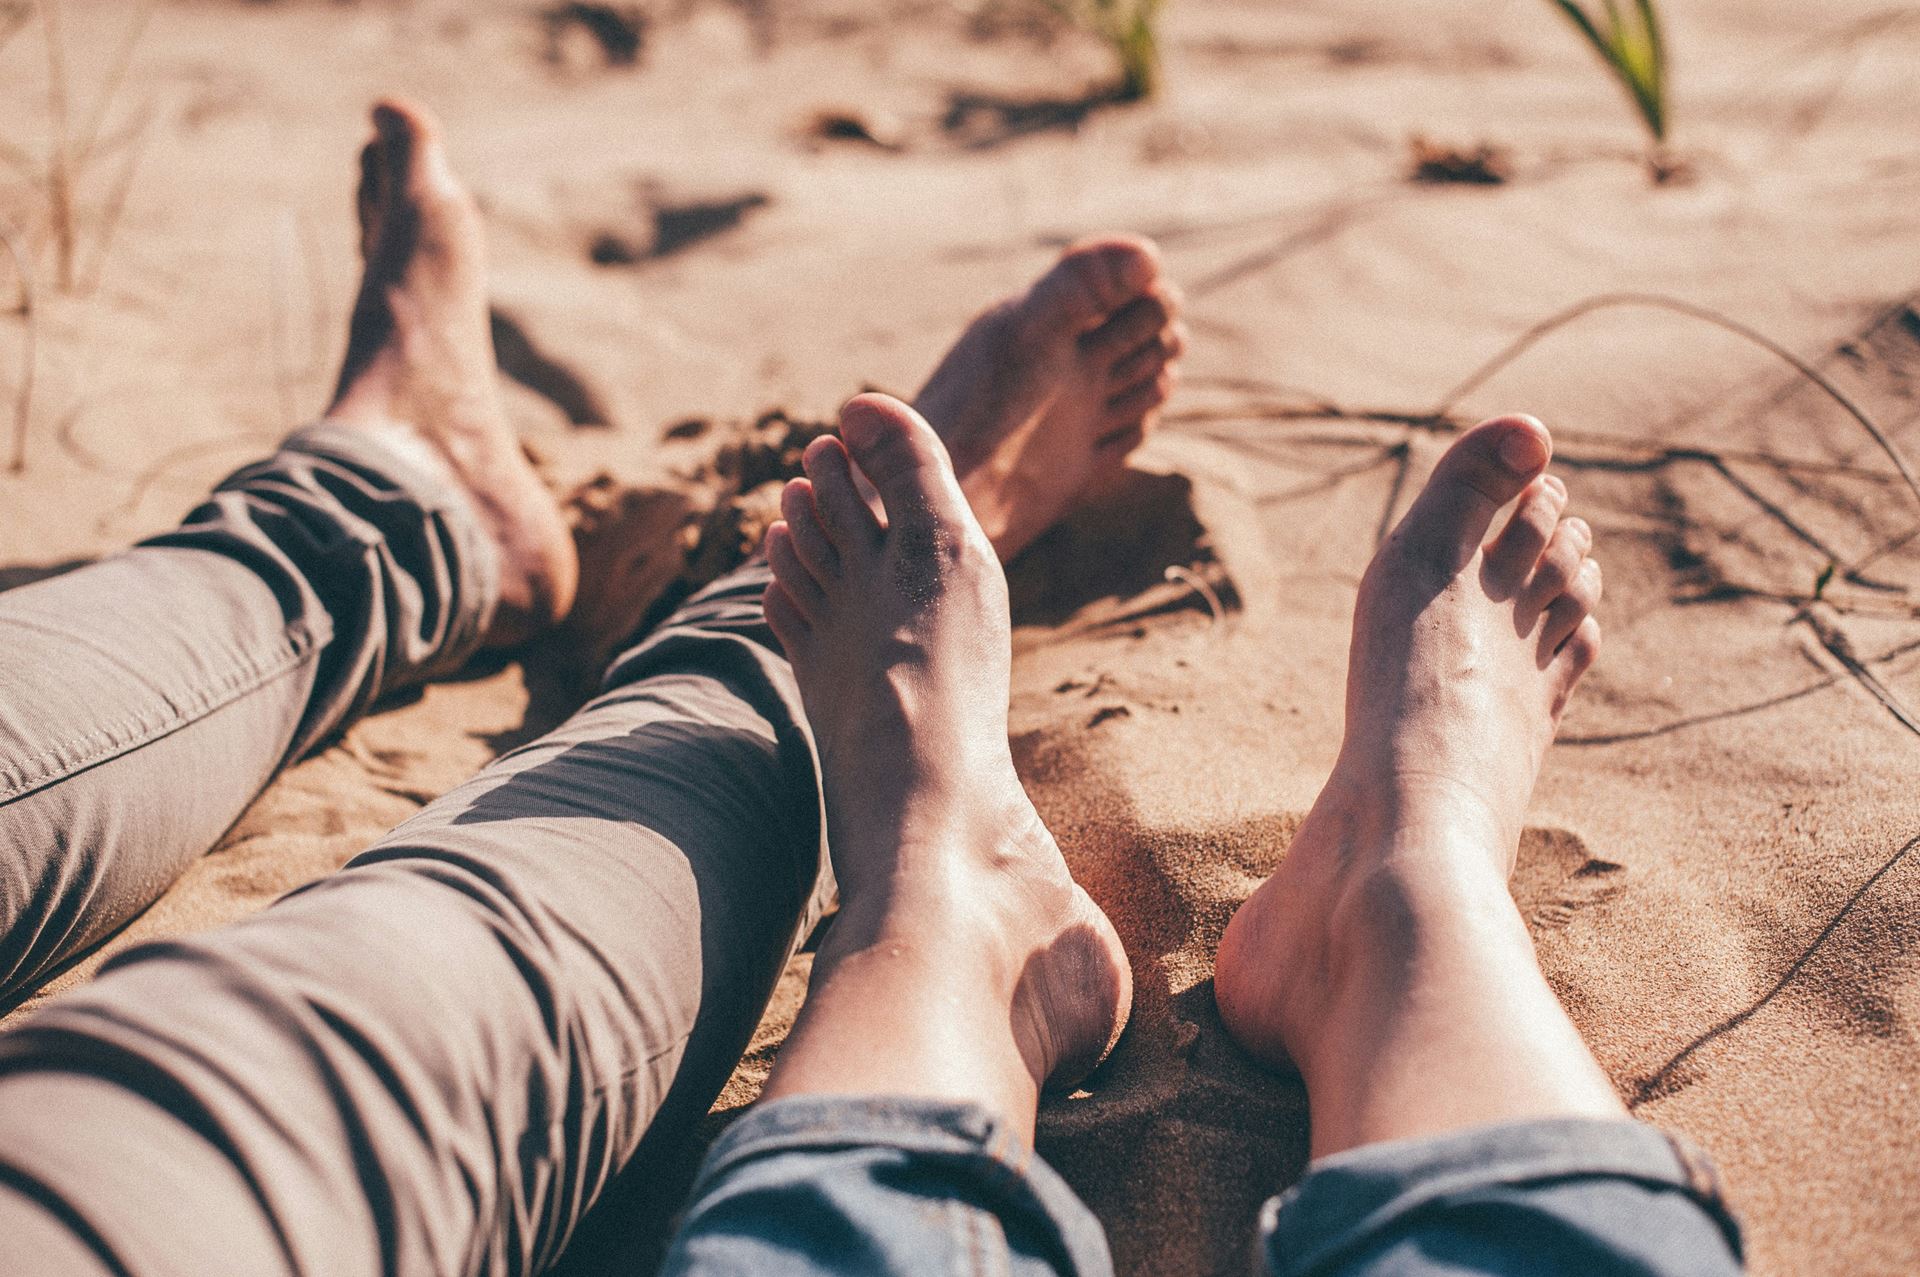 Two peoples bare feet on a beach